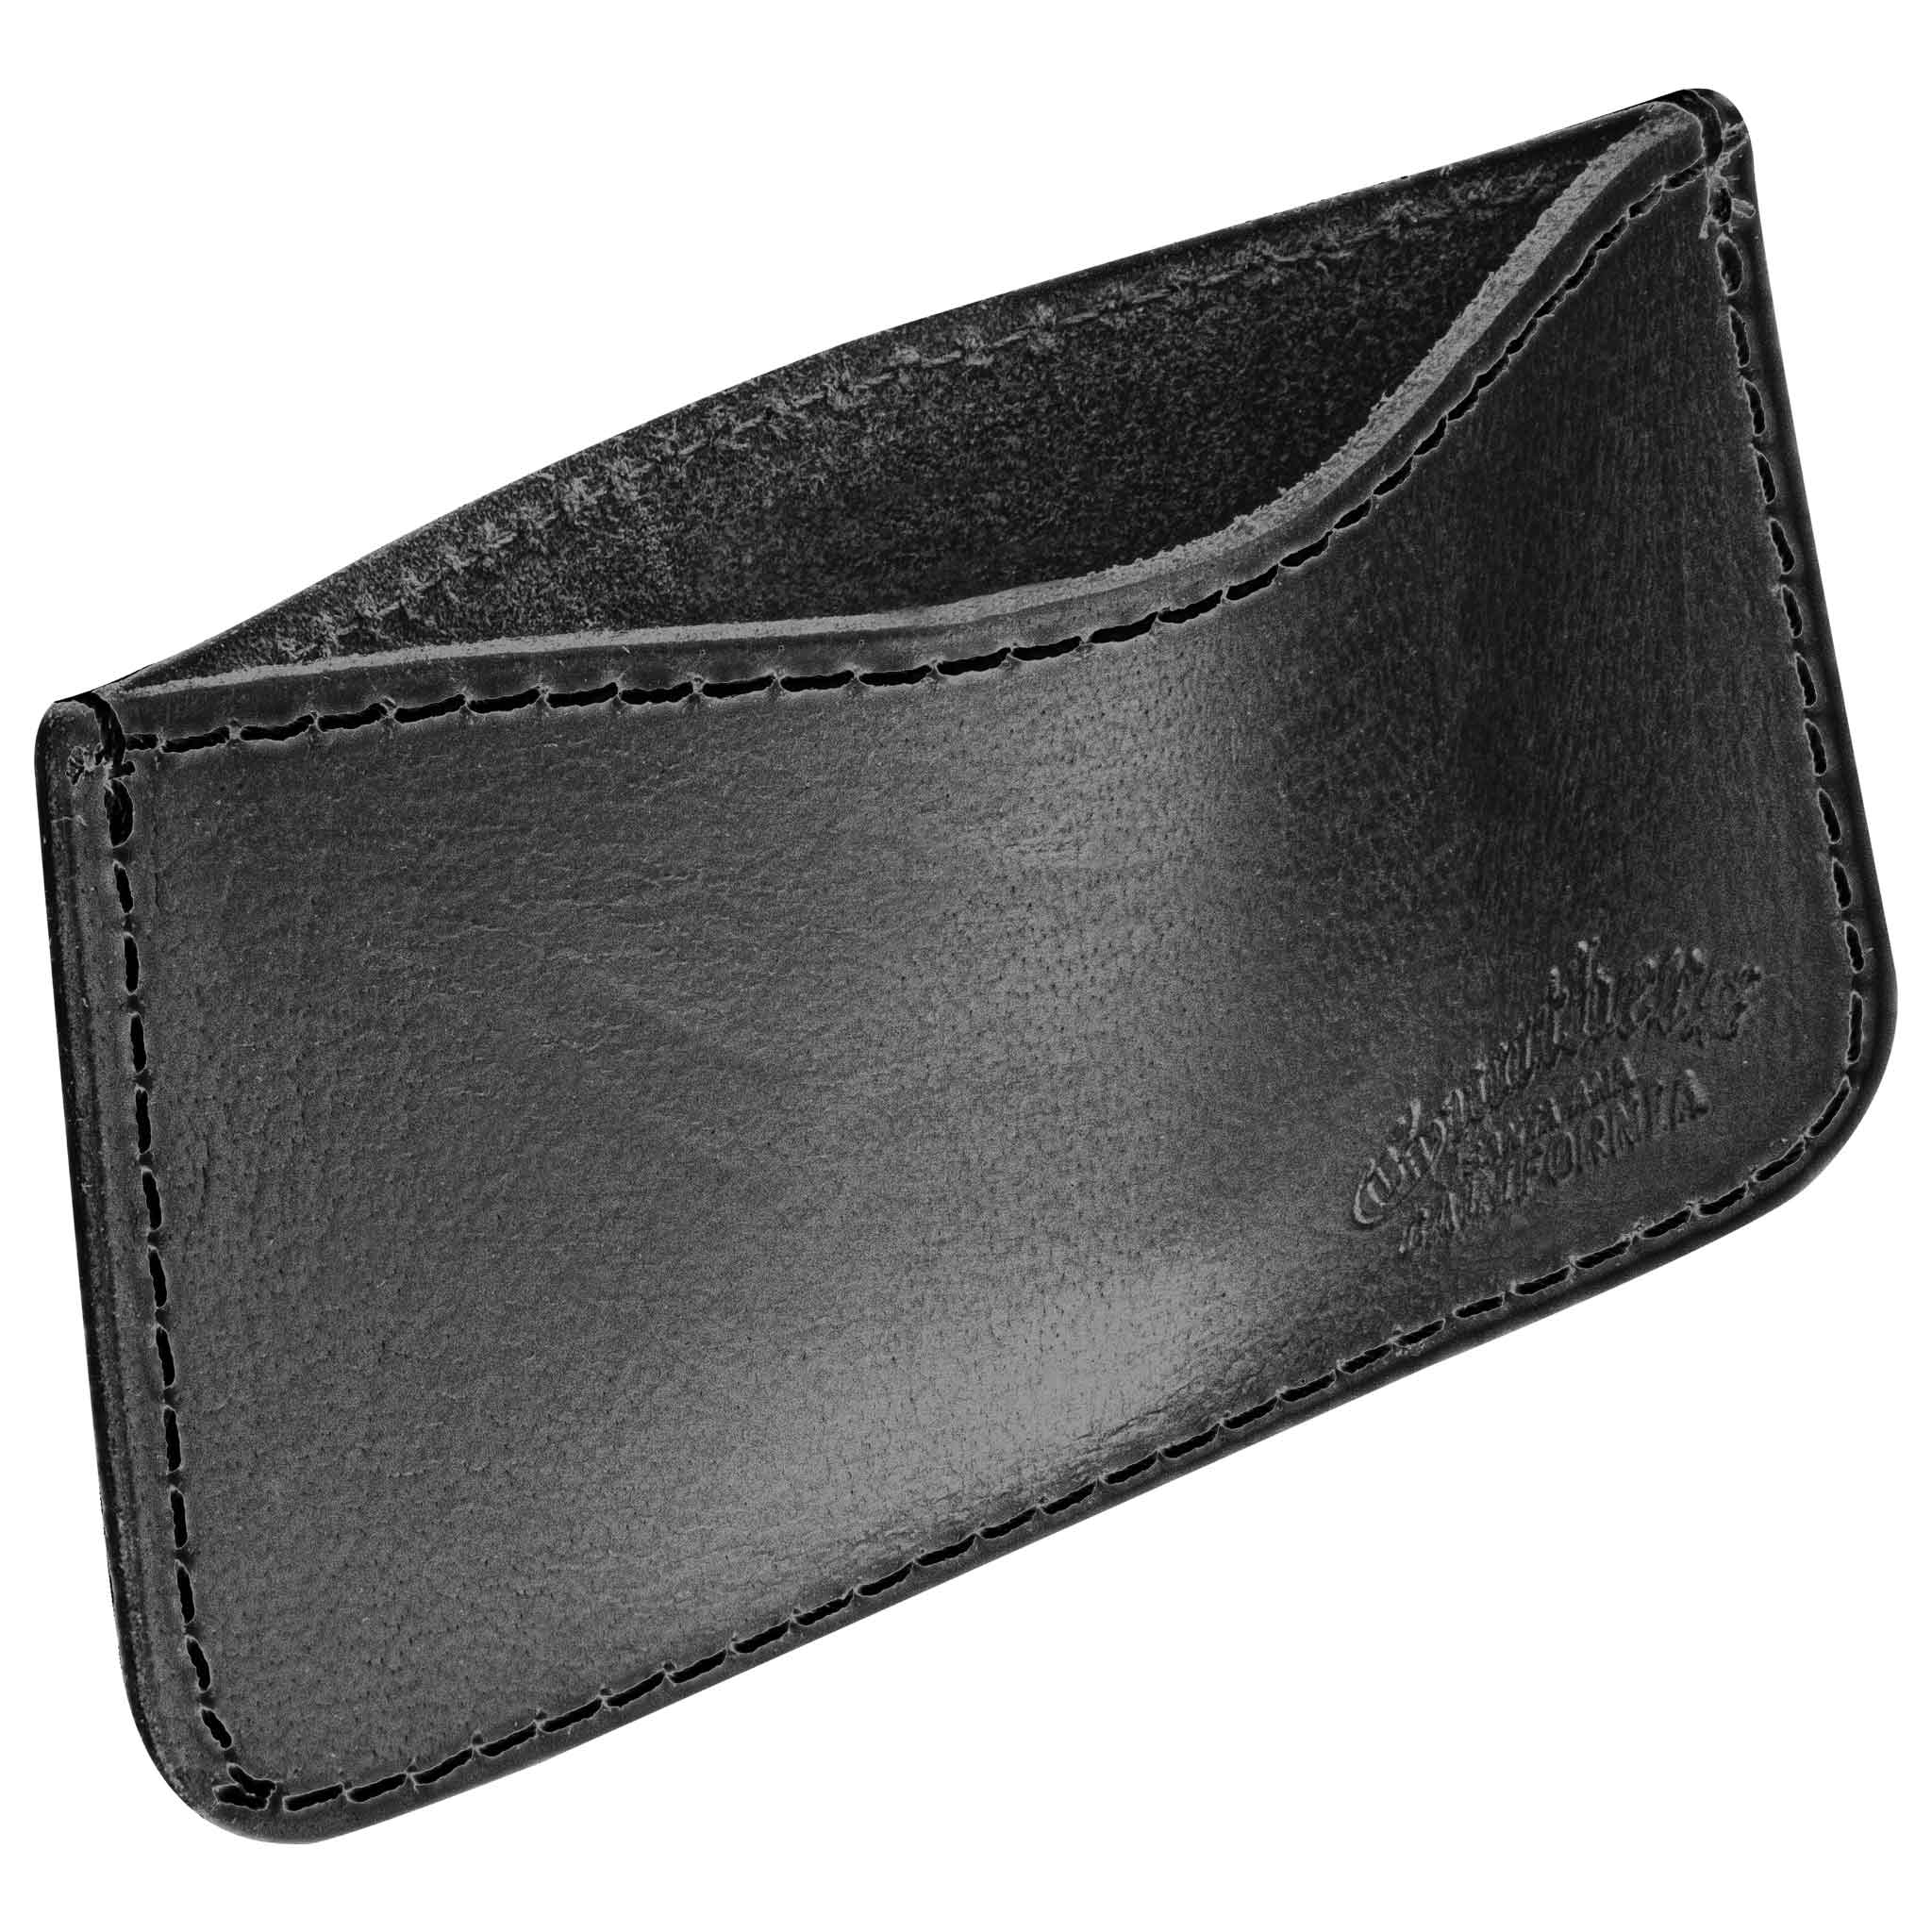 Small Leather Pouch Black